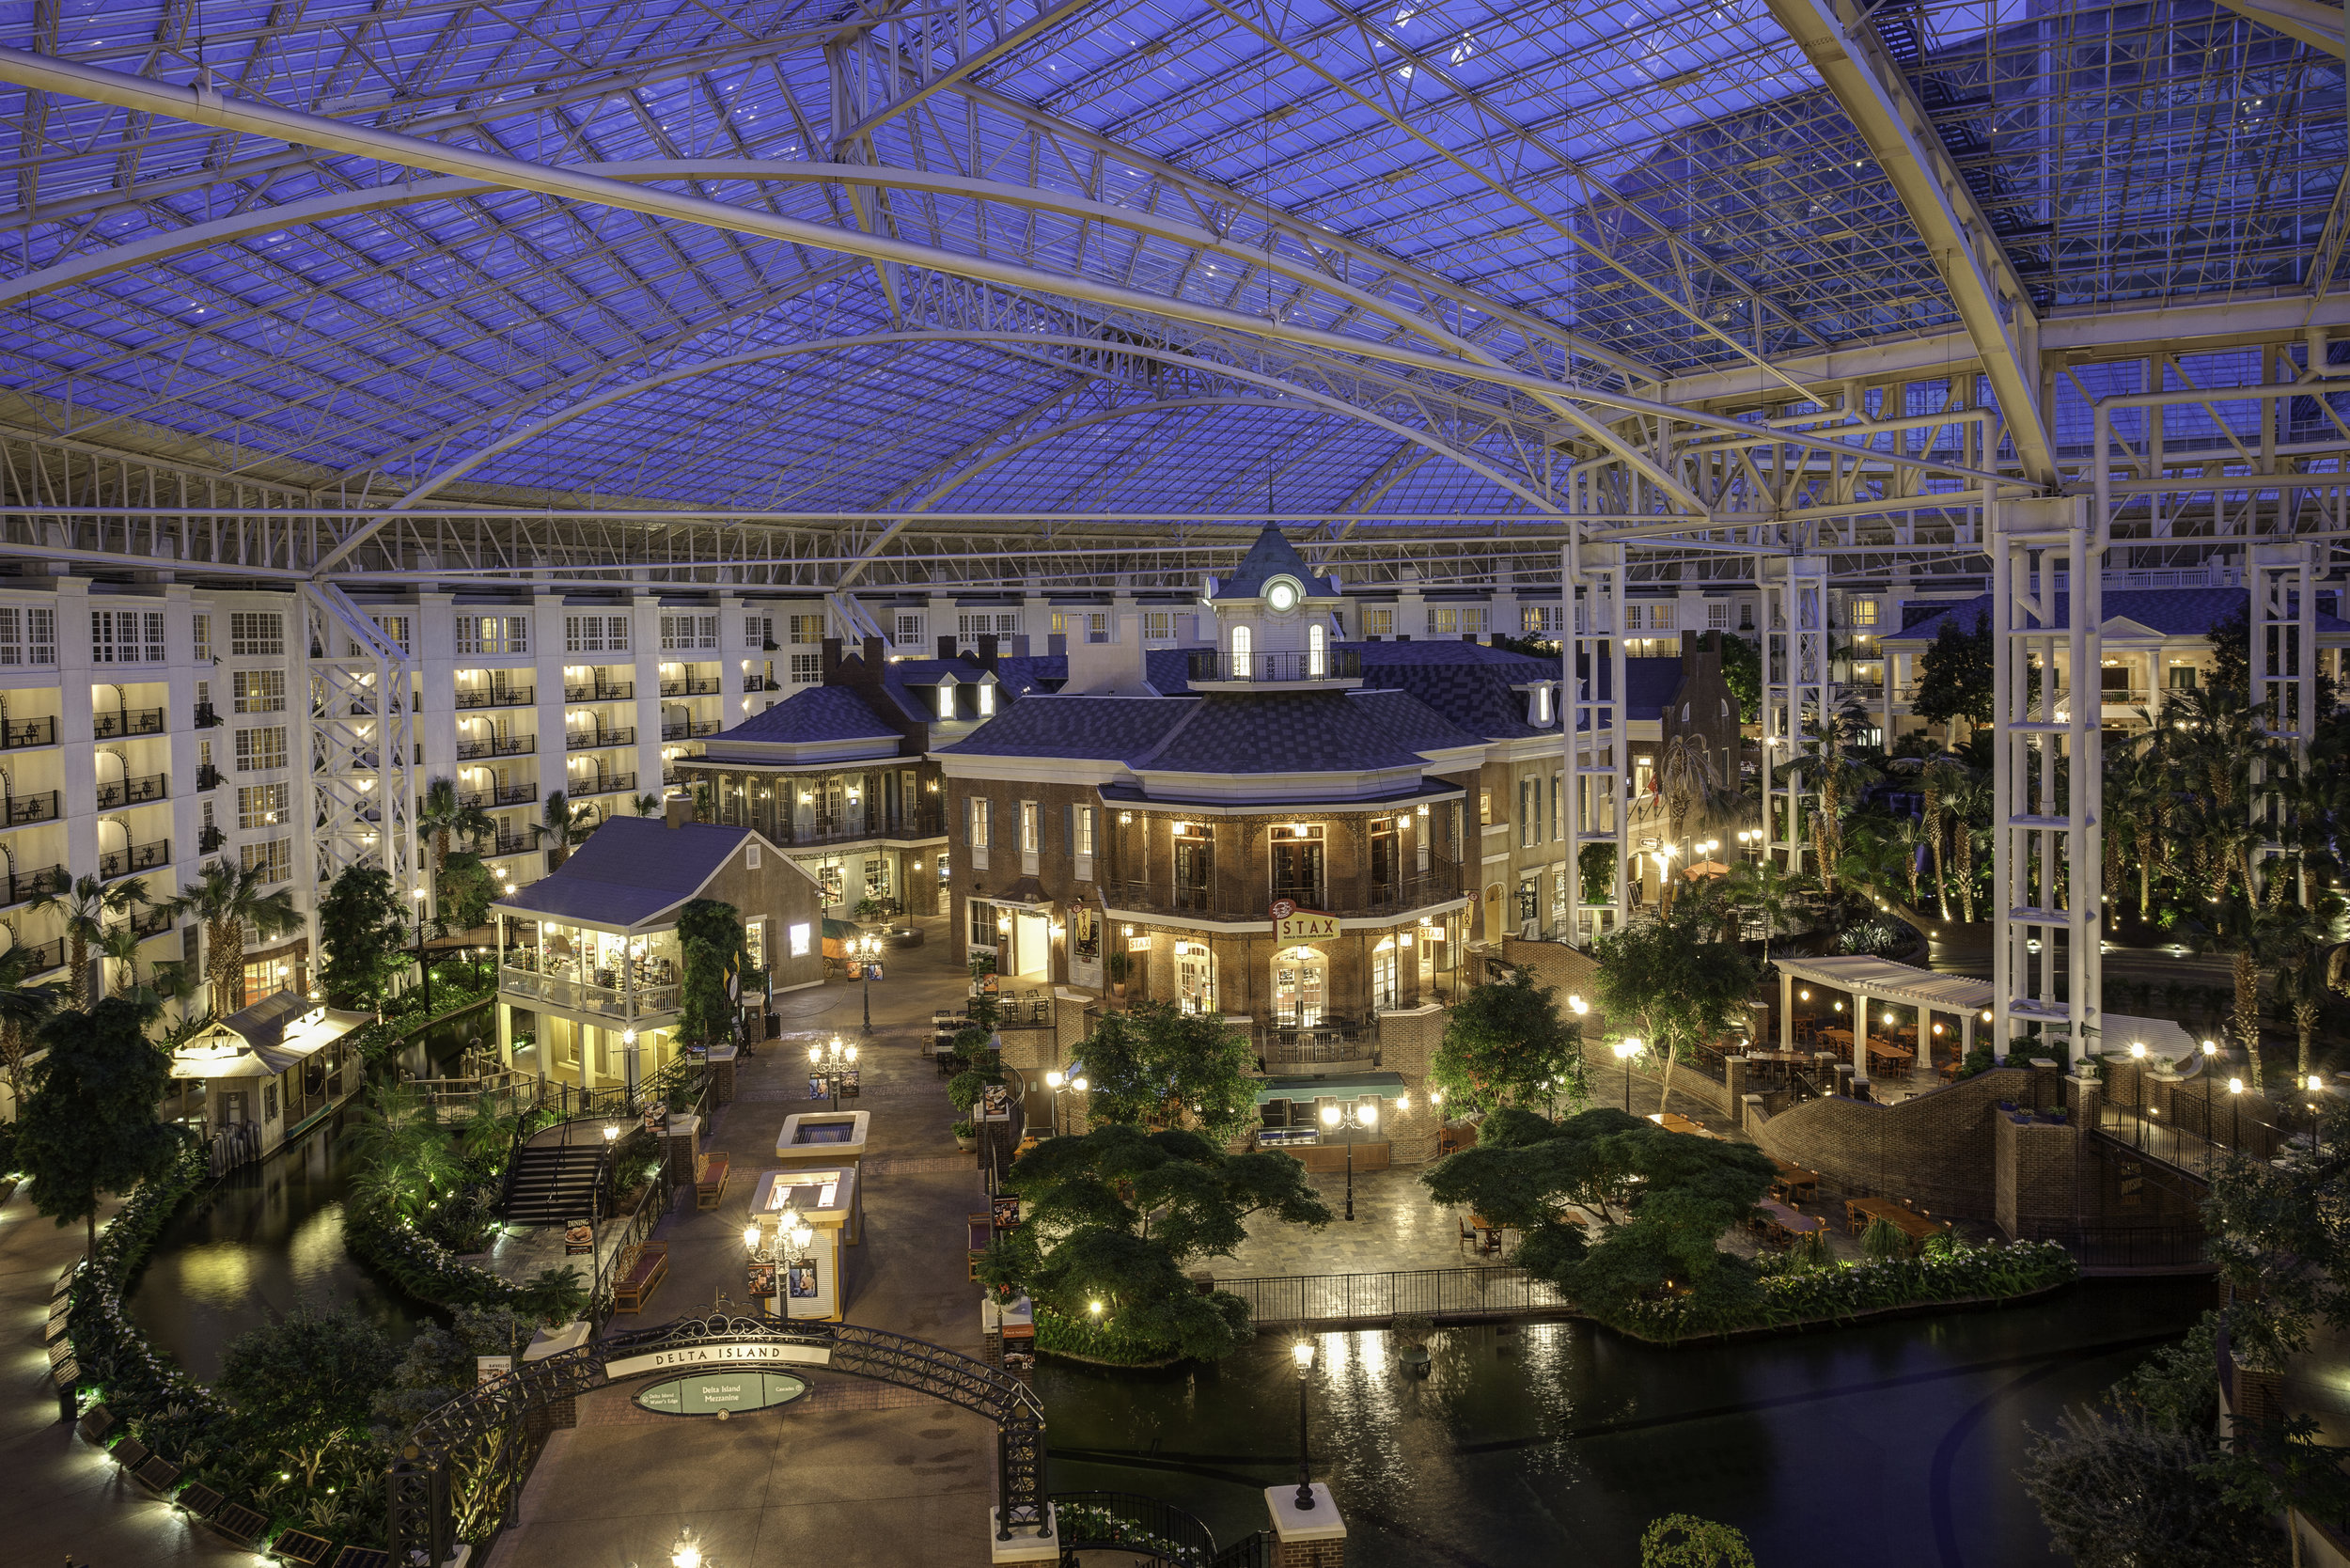   Photo Courtesy of the Gaylord Opryland Hotel  